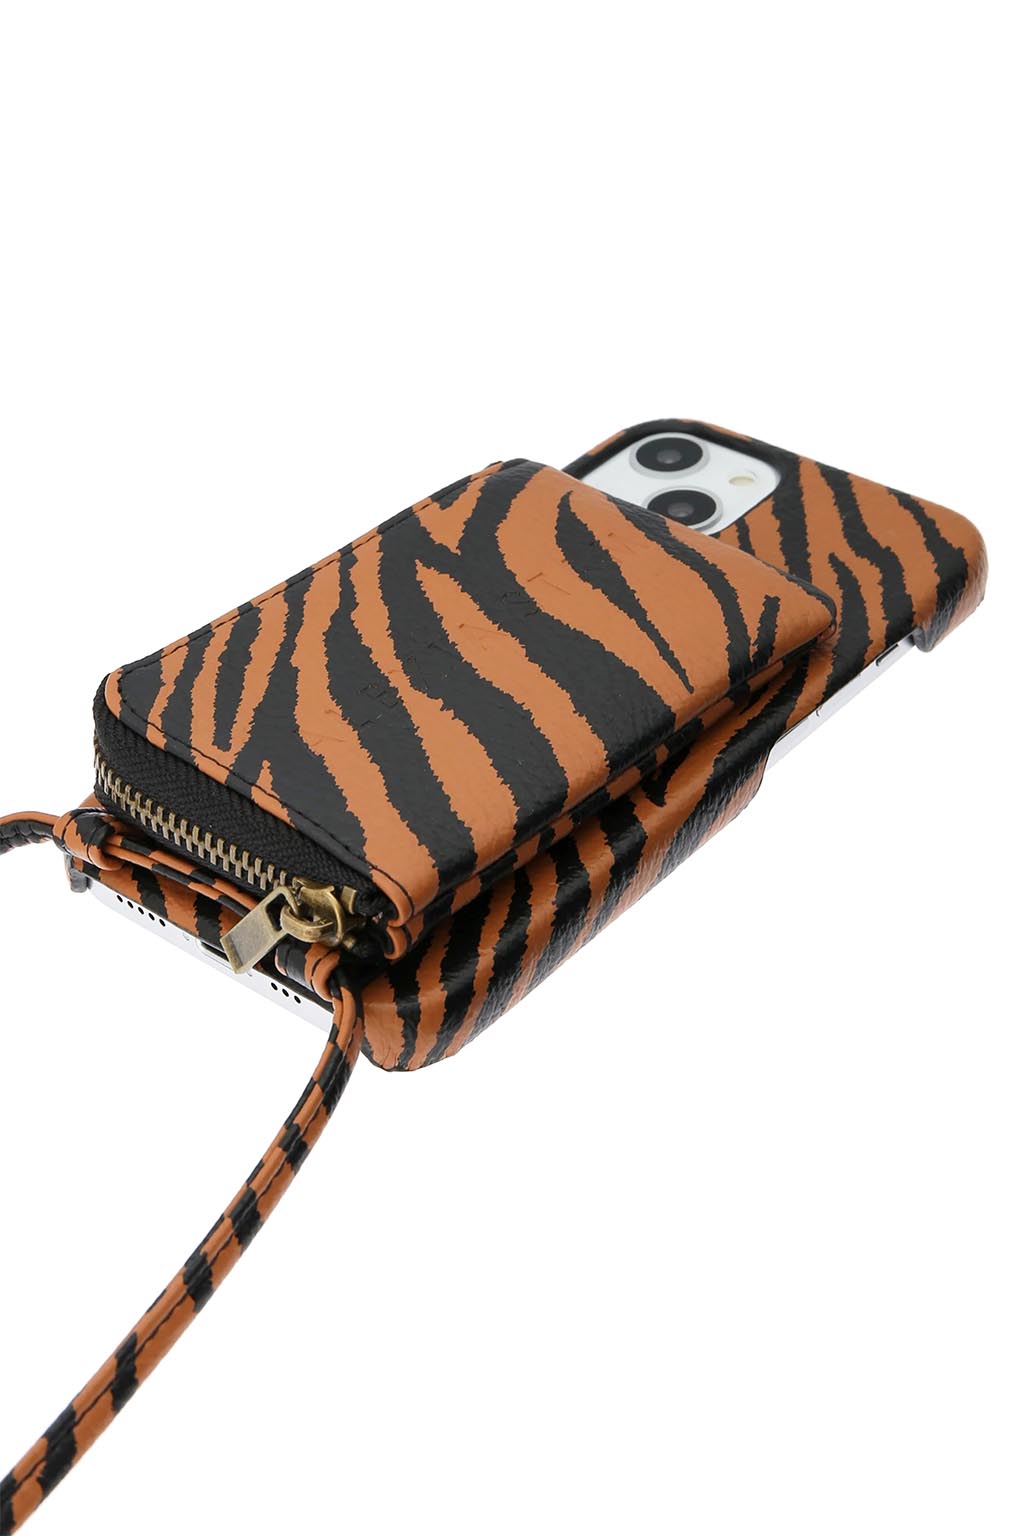 Eco Leather iPhone Case With Strap Zebra 5